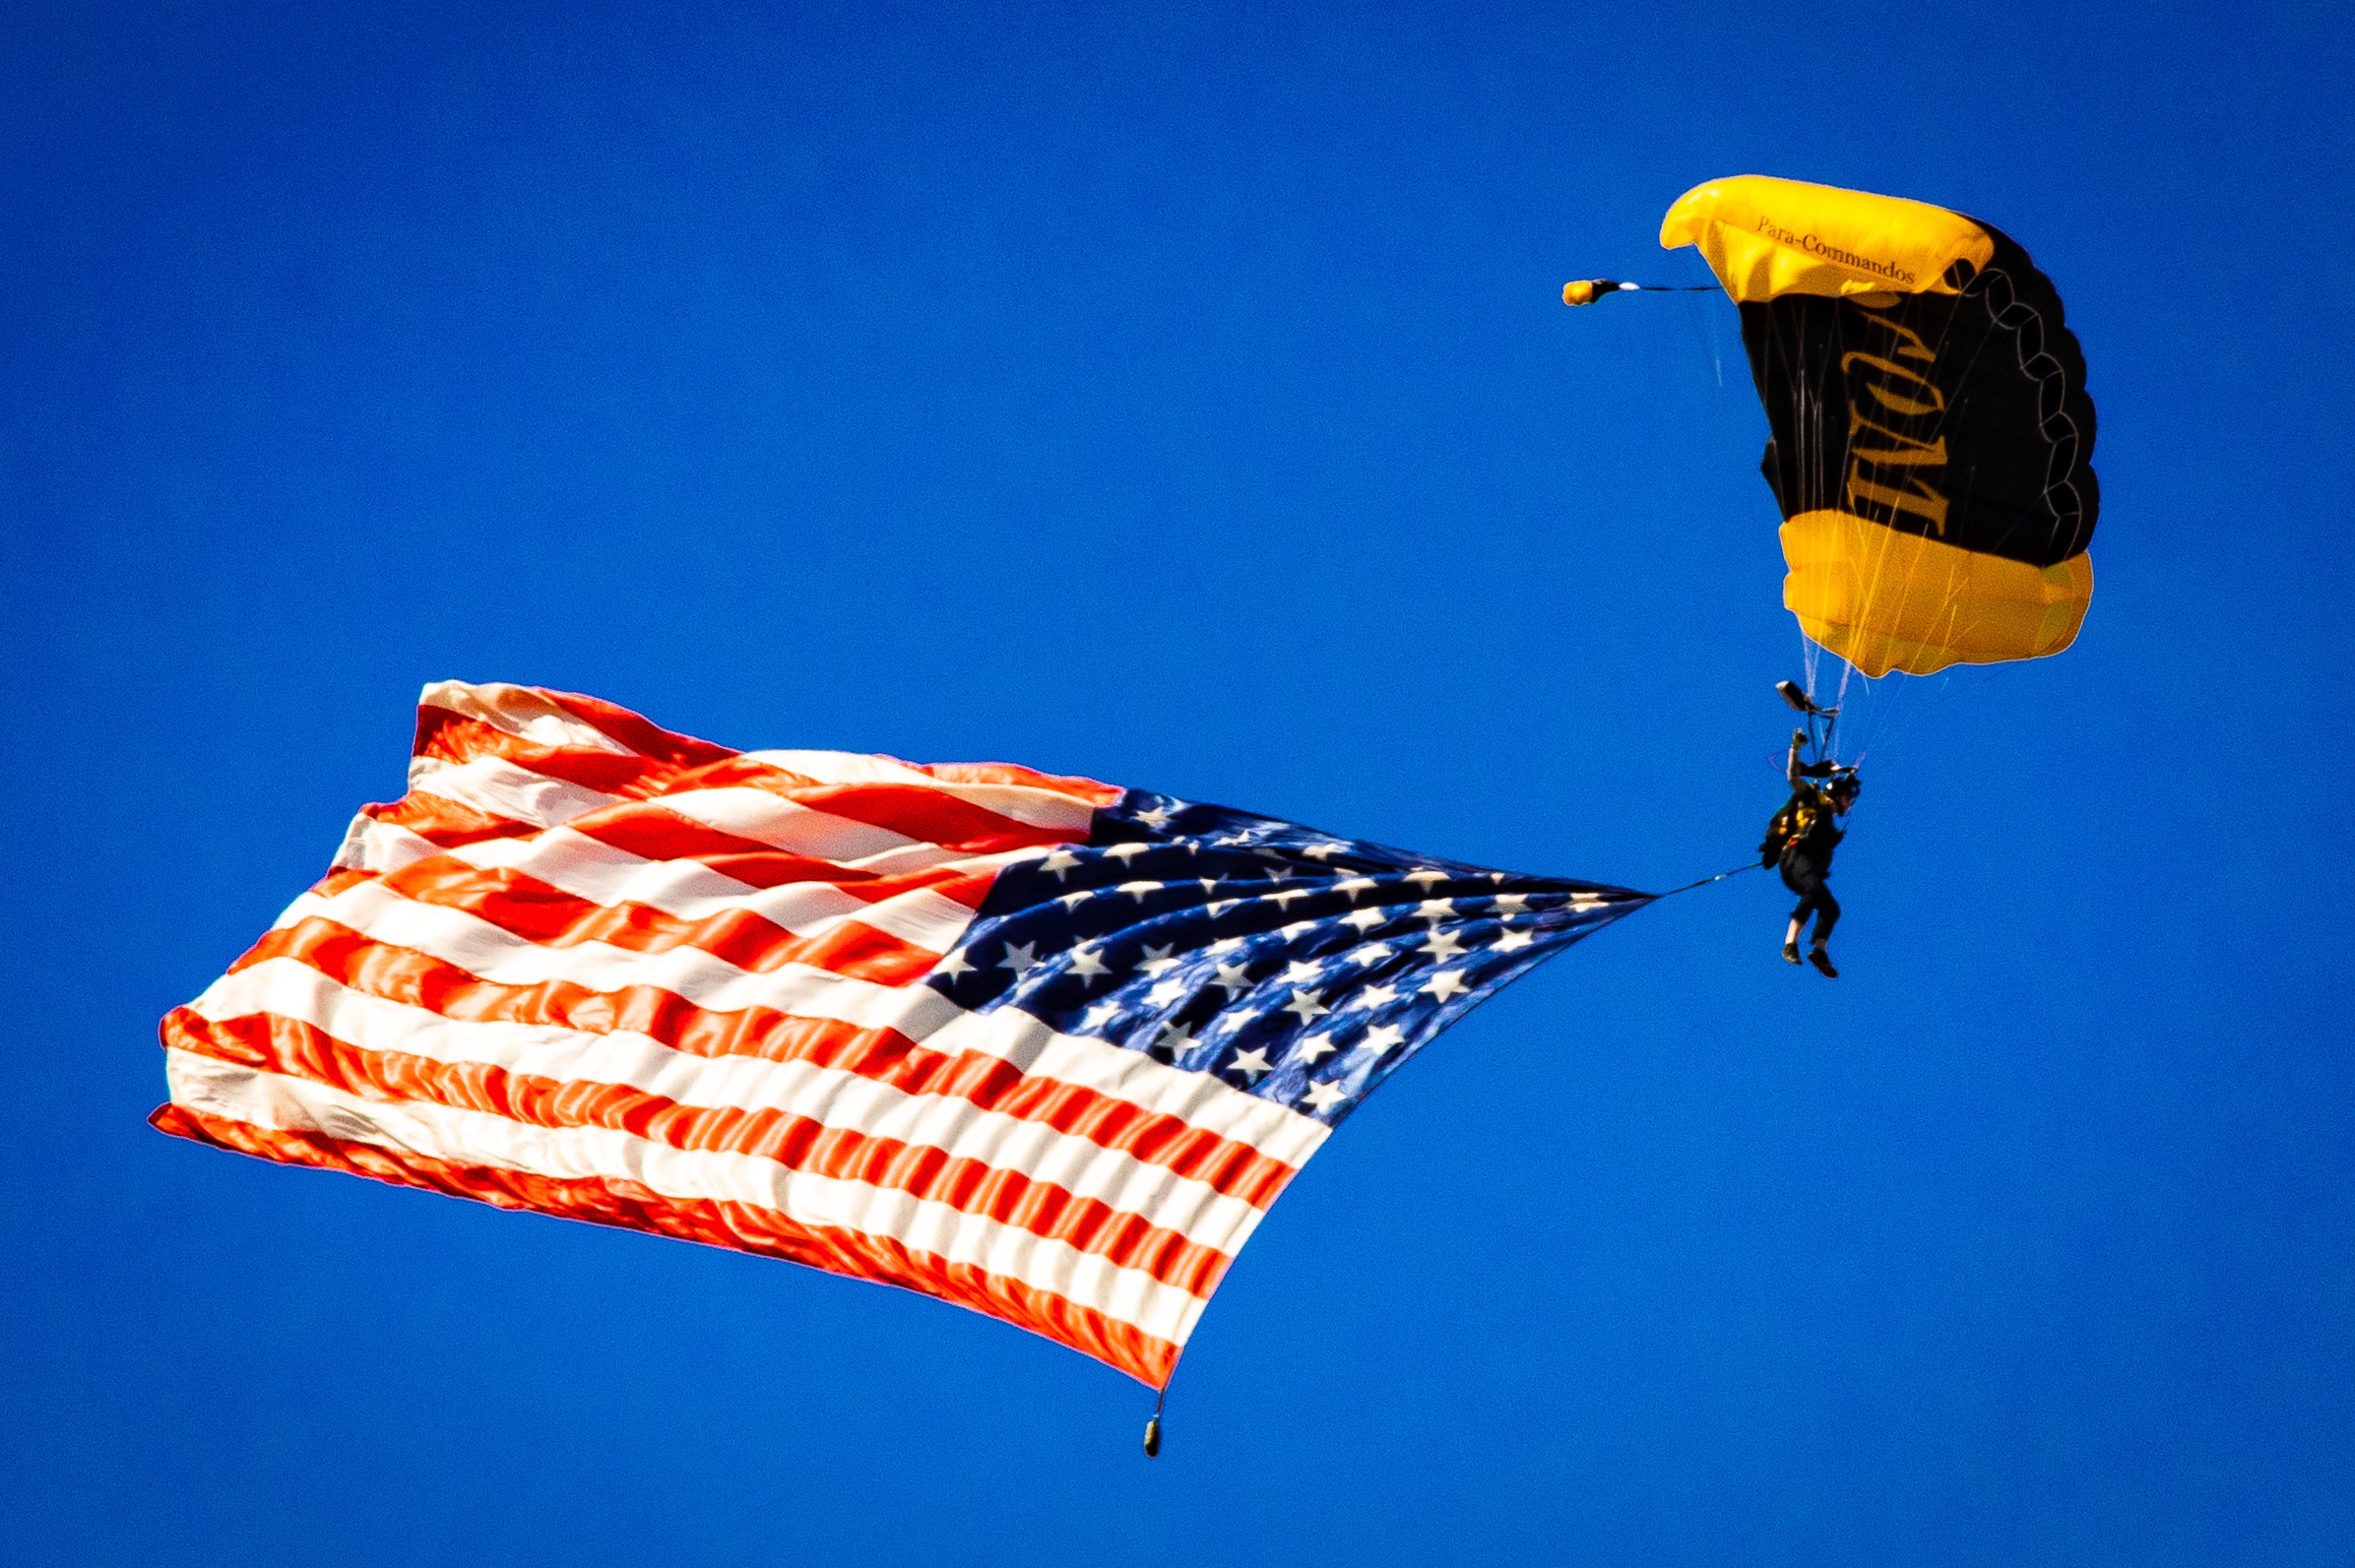 A member of the Golden Knight team parachutes down to the ground